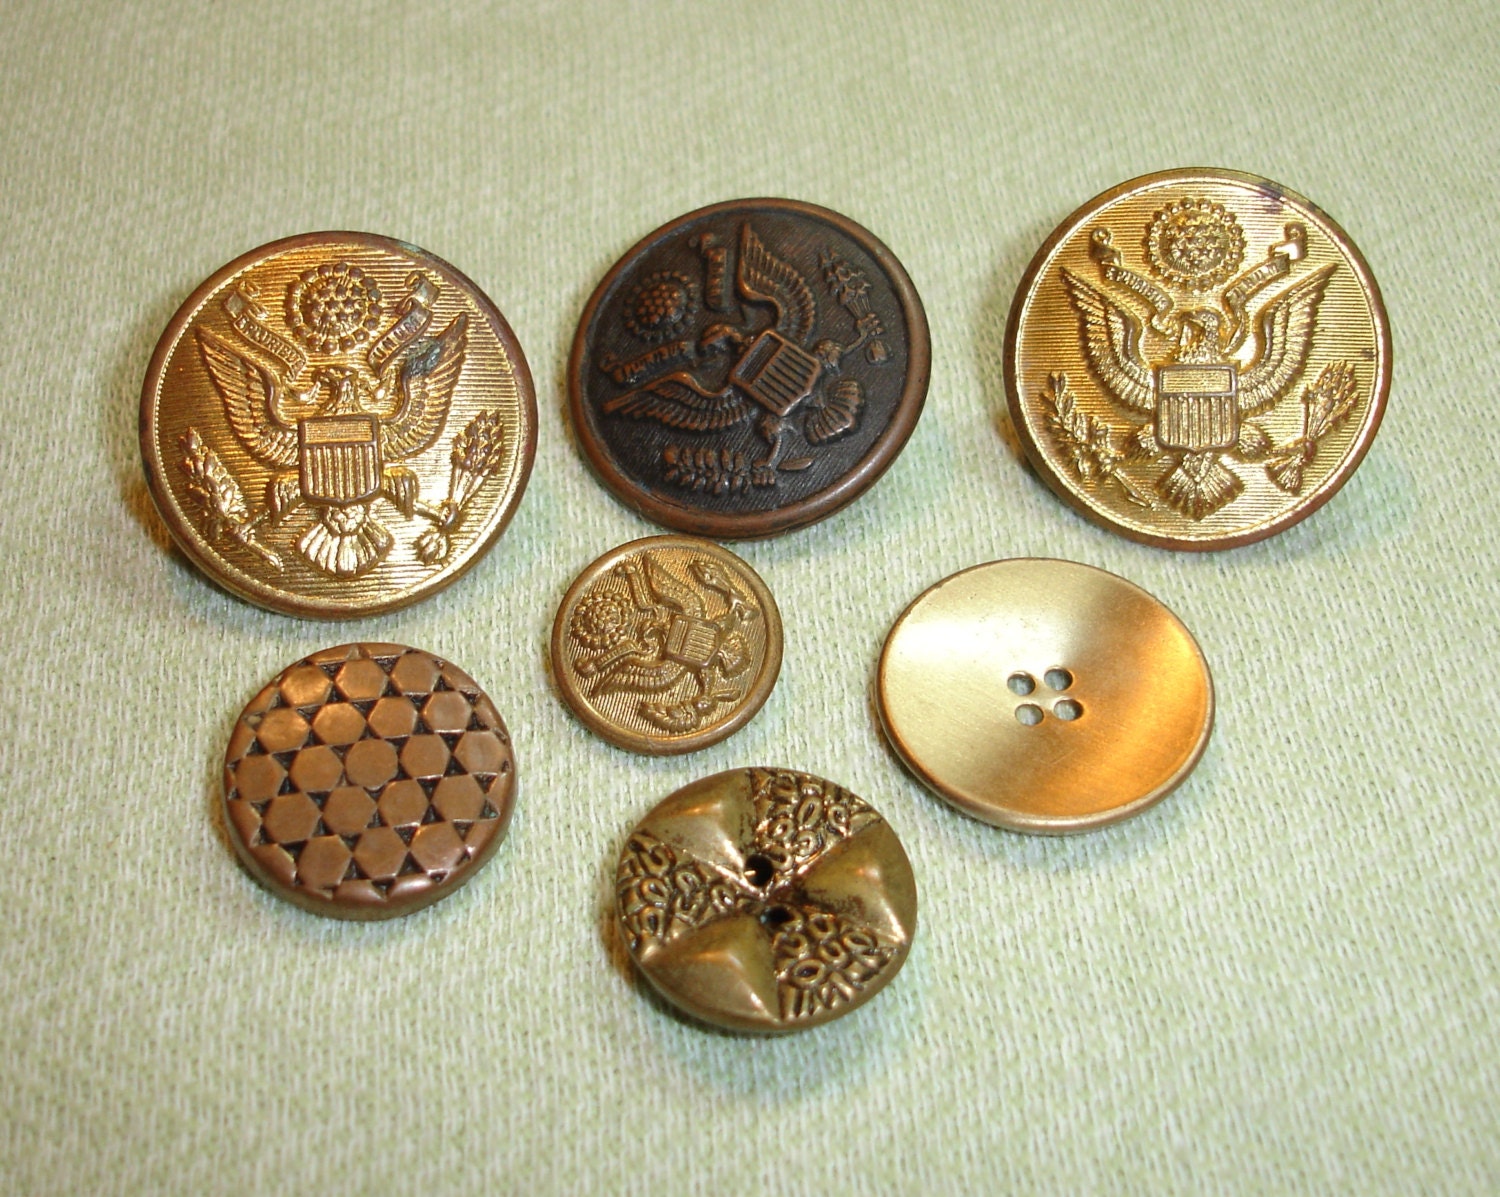 Vintage Military Buttons Eagle Buttons 7 by HarmoneesCreations